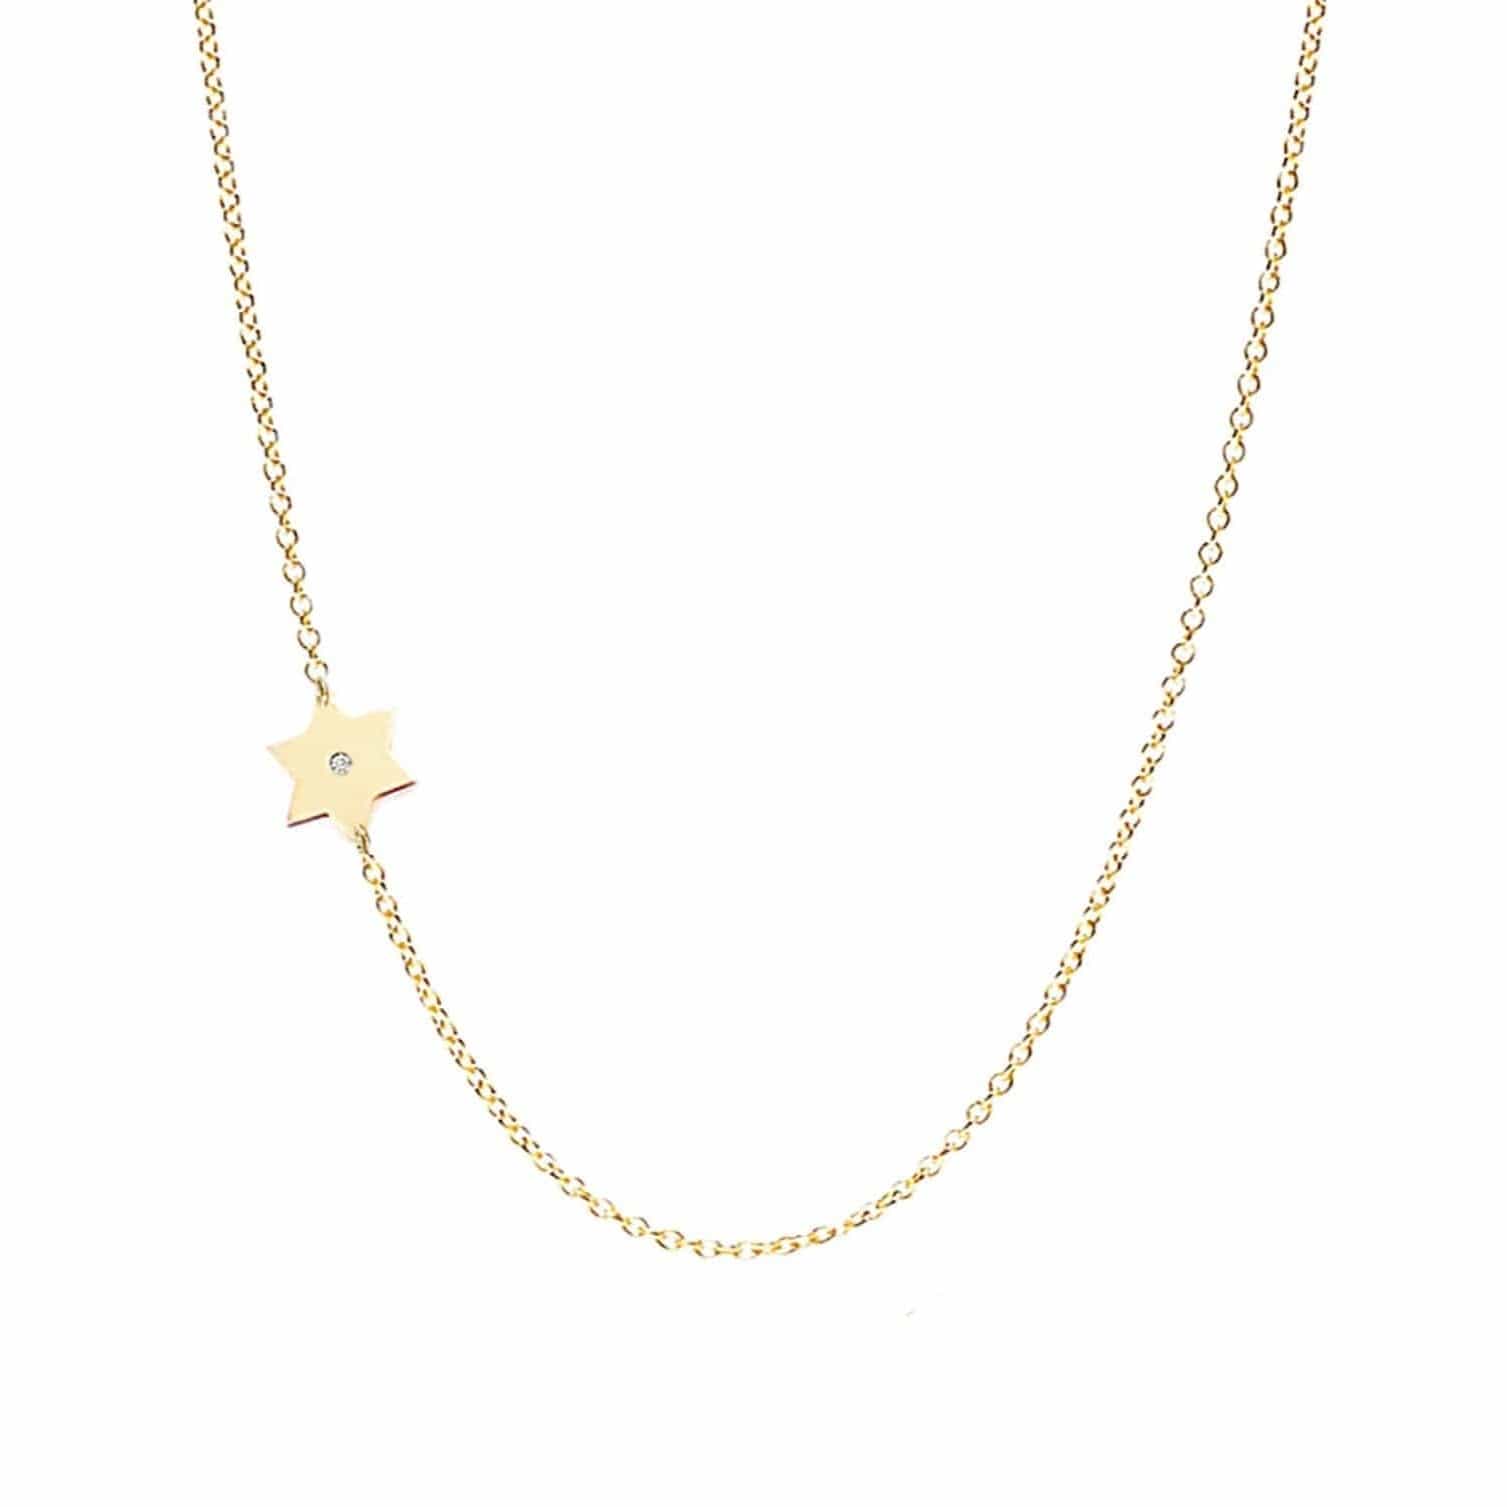 Miriam Merenfeld Jewelry Necklaces Classic Star of David Necklace - Gold-Plated - 16" Chain